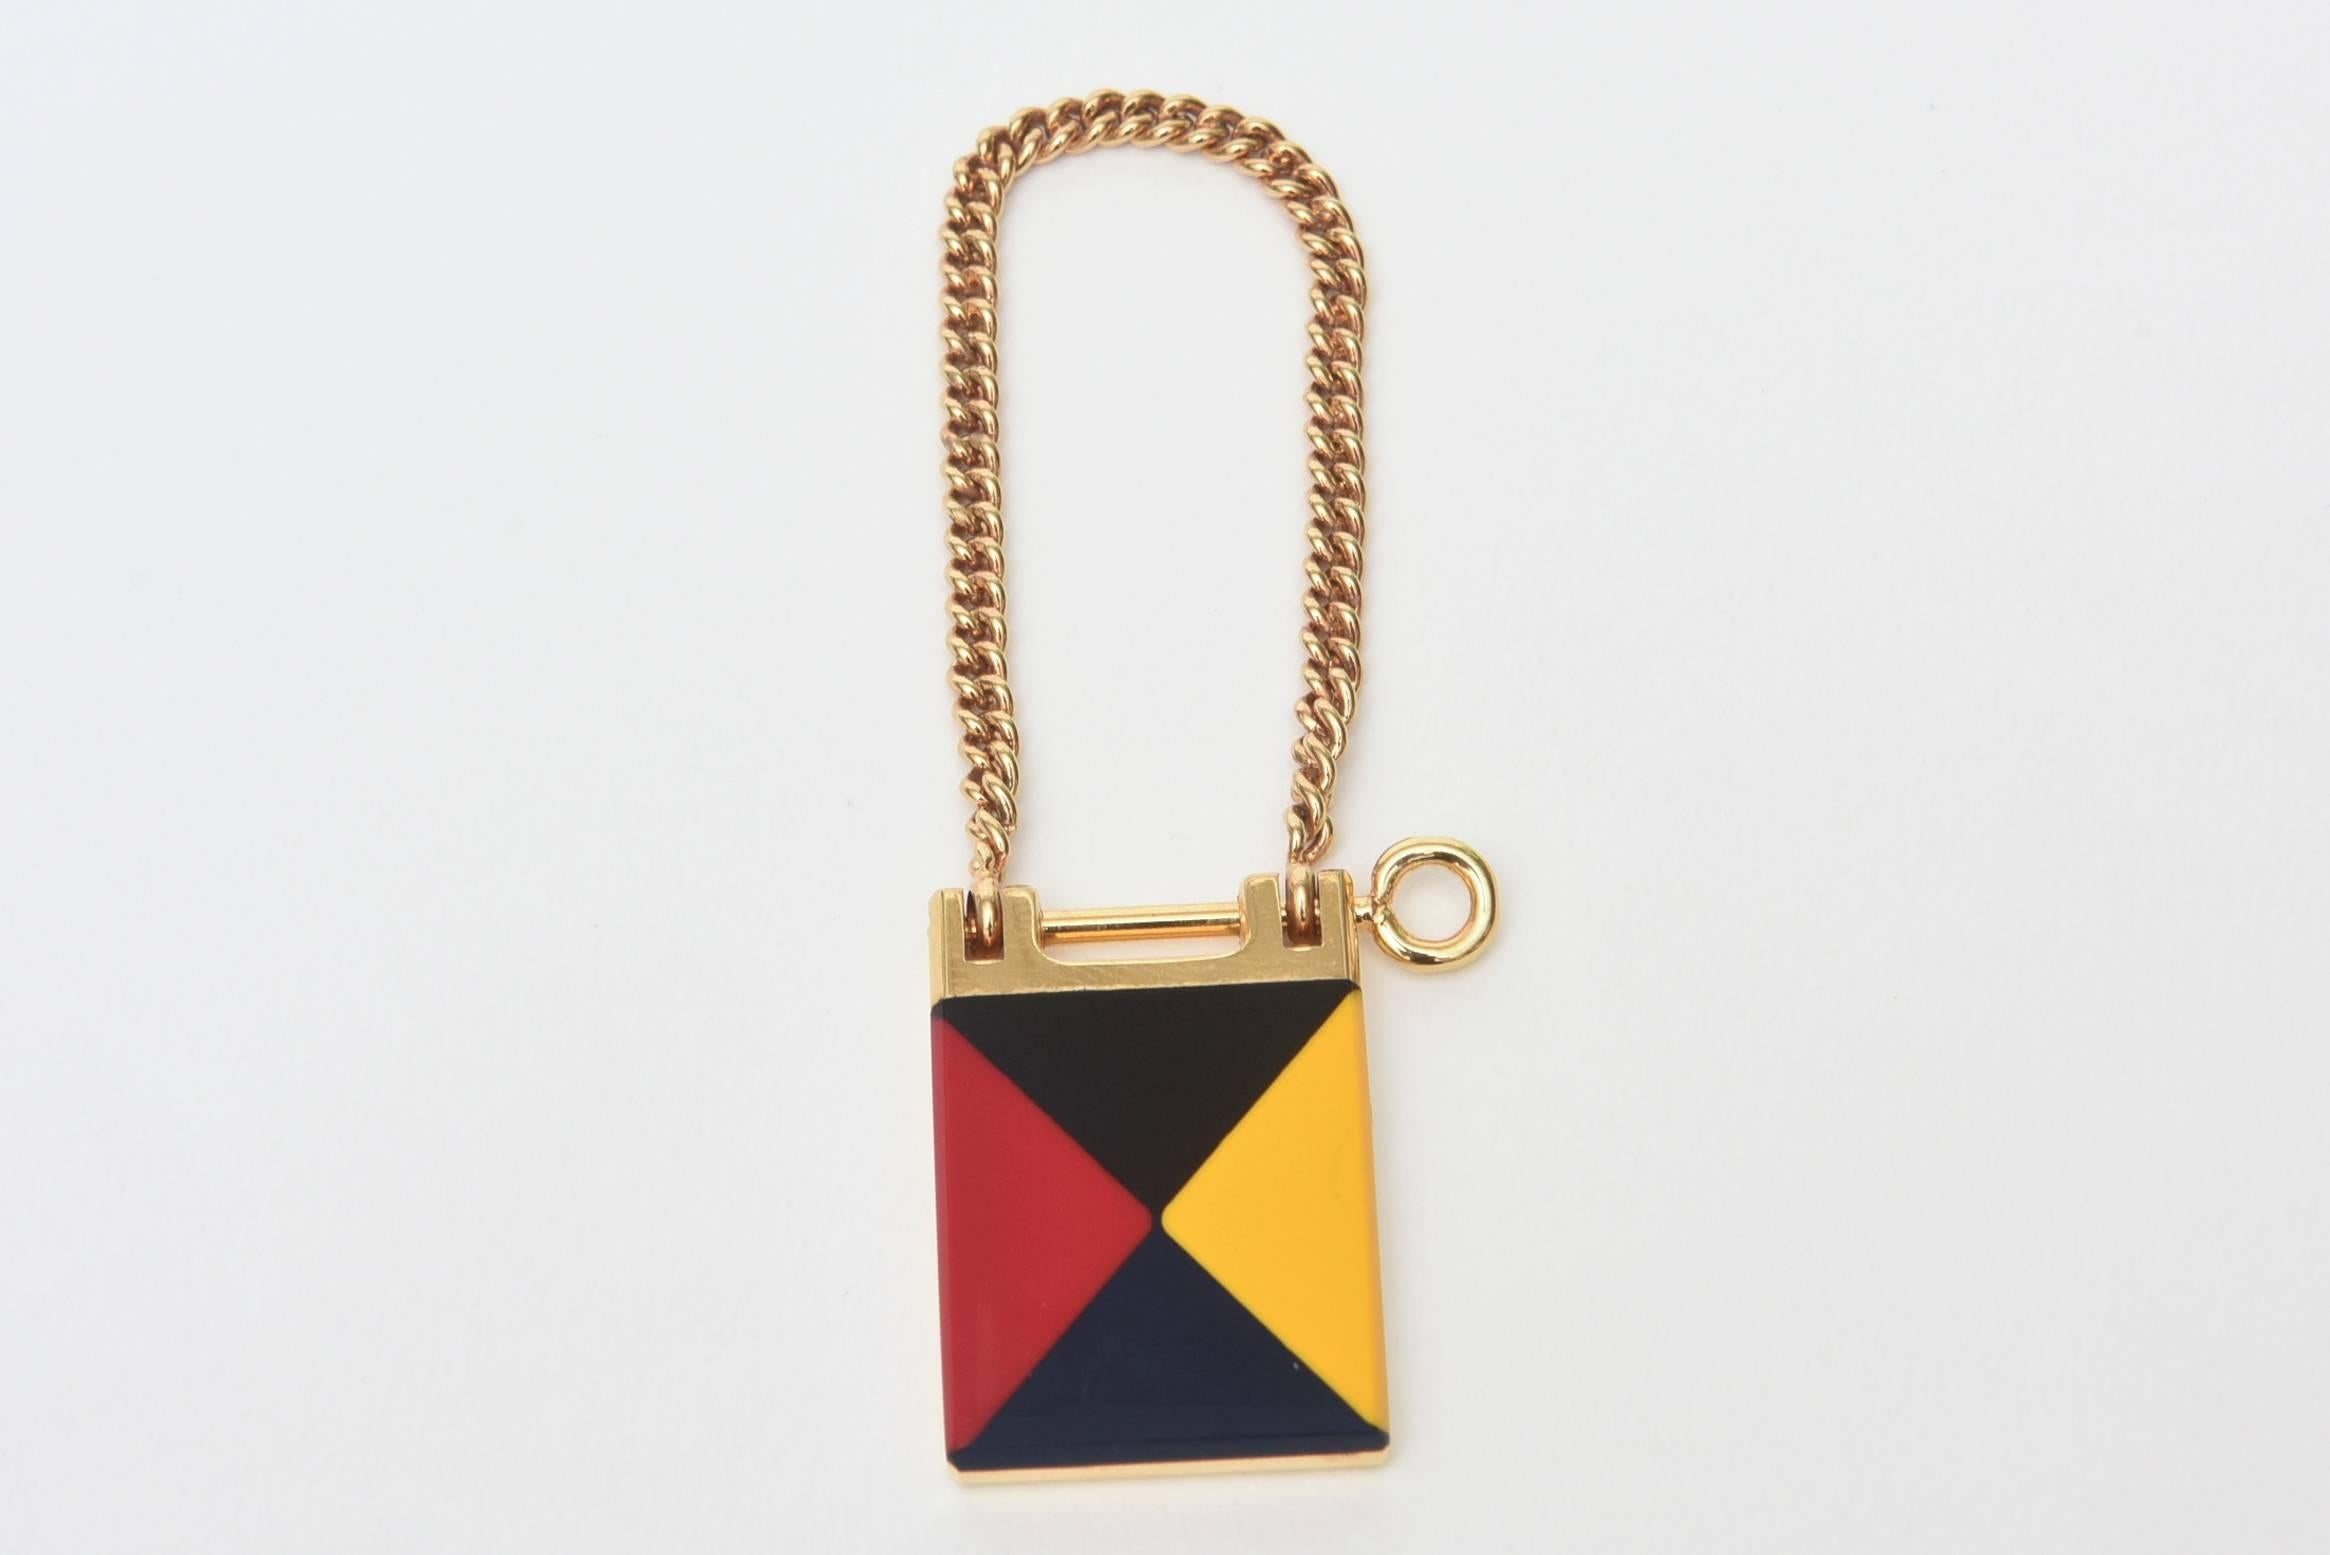  This signed Italian vintage Gucci enamel and gold plated key ring comes in it's own original box. It is very Mondrian style. What a chic way to carry your keys. This makes a great gift as well as a great keychains for your own pleasure.  It is from